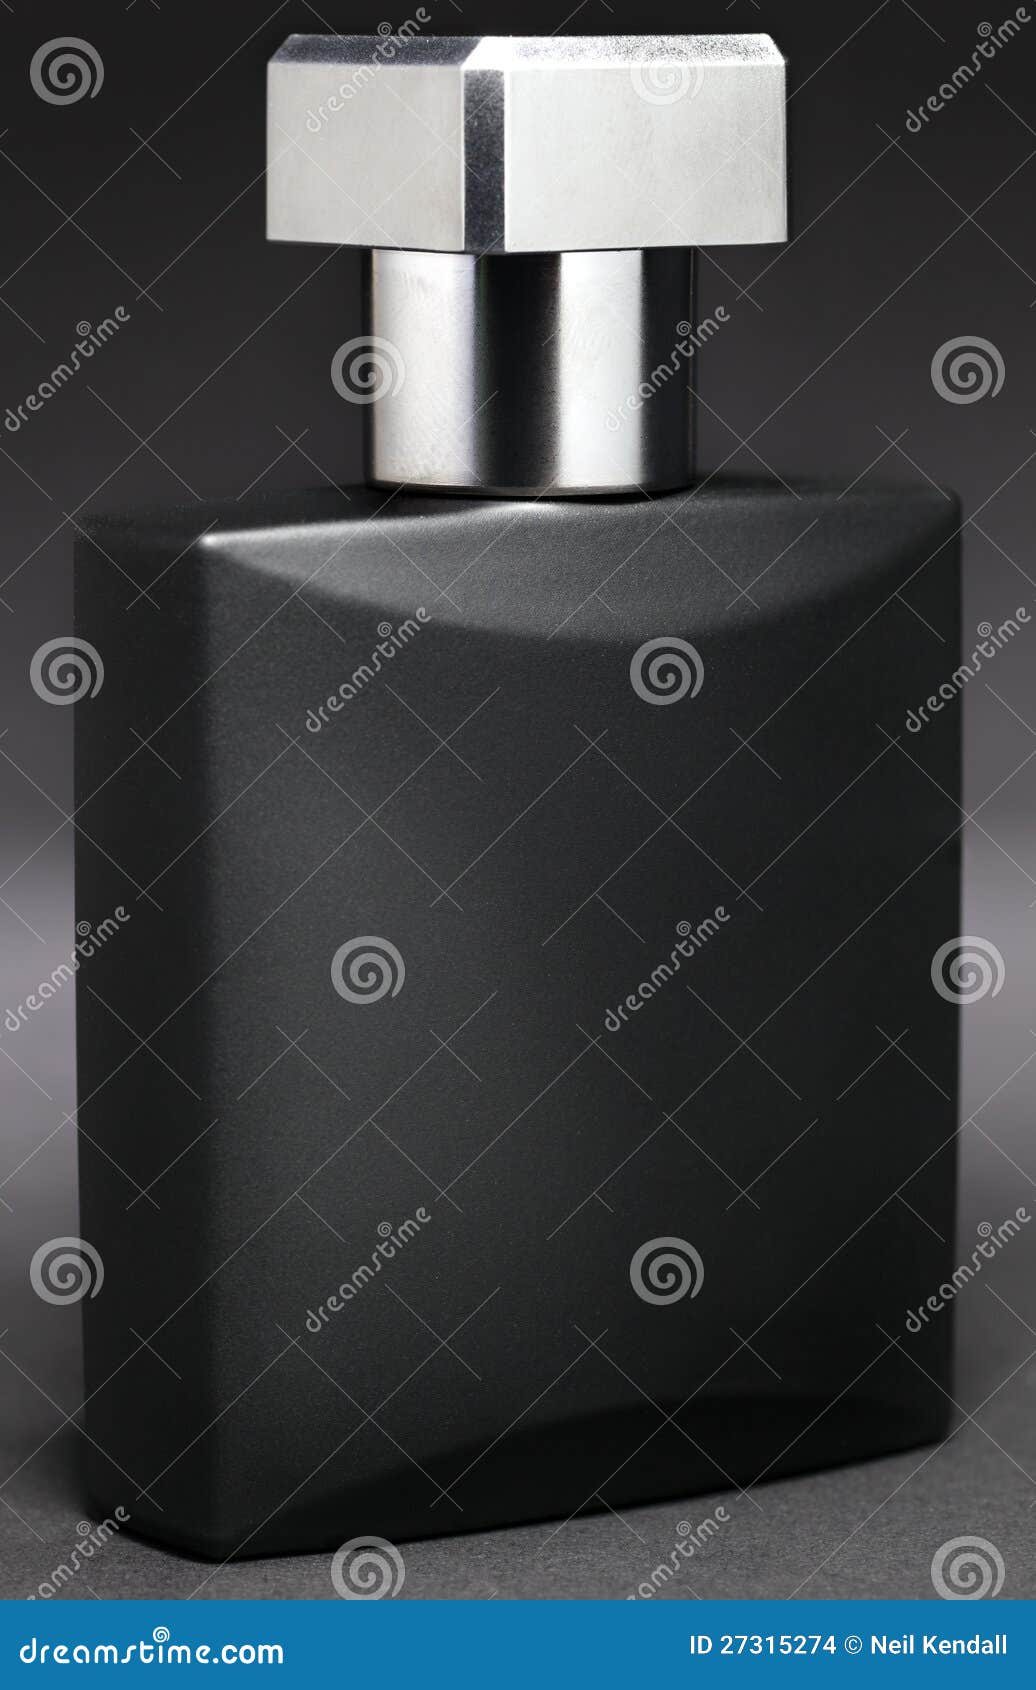 generic aftershave